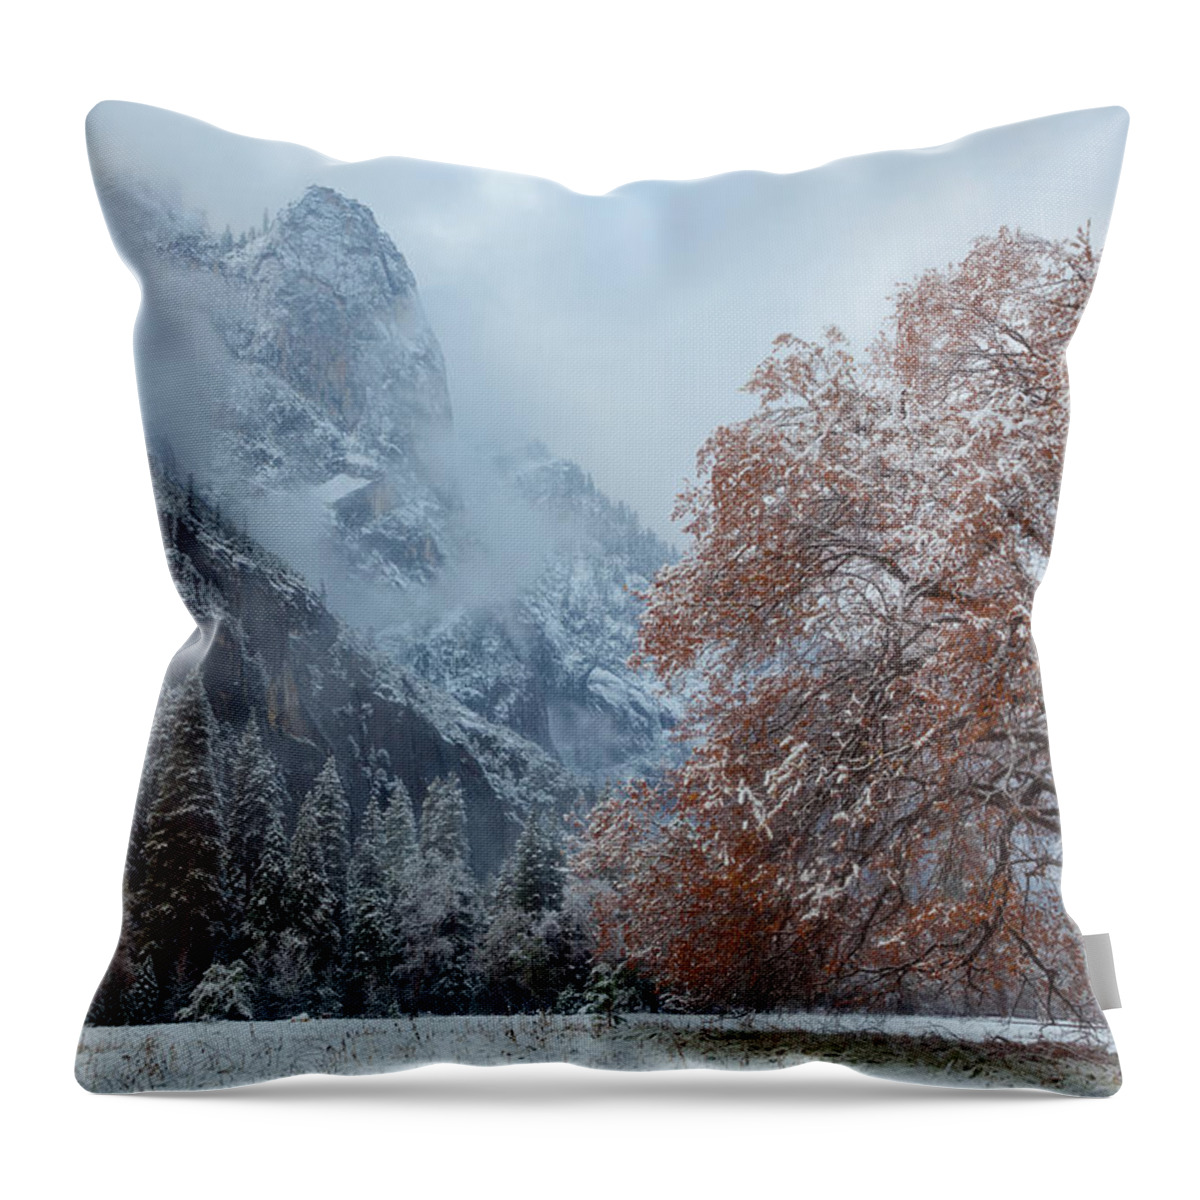 Landscape Throw Pillow featuring the photograph The Two Seasons by Jonathan Nguyen